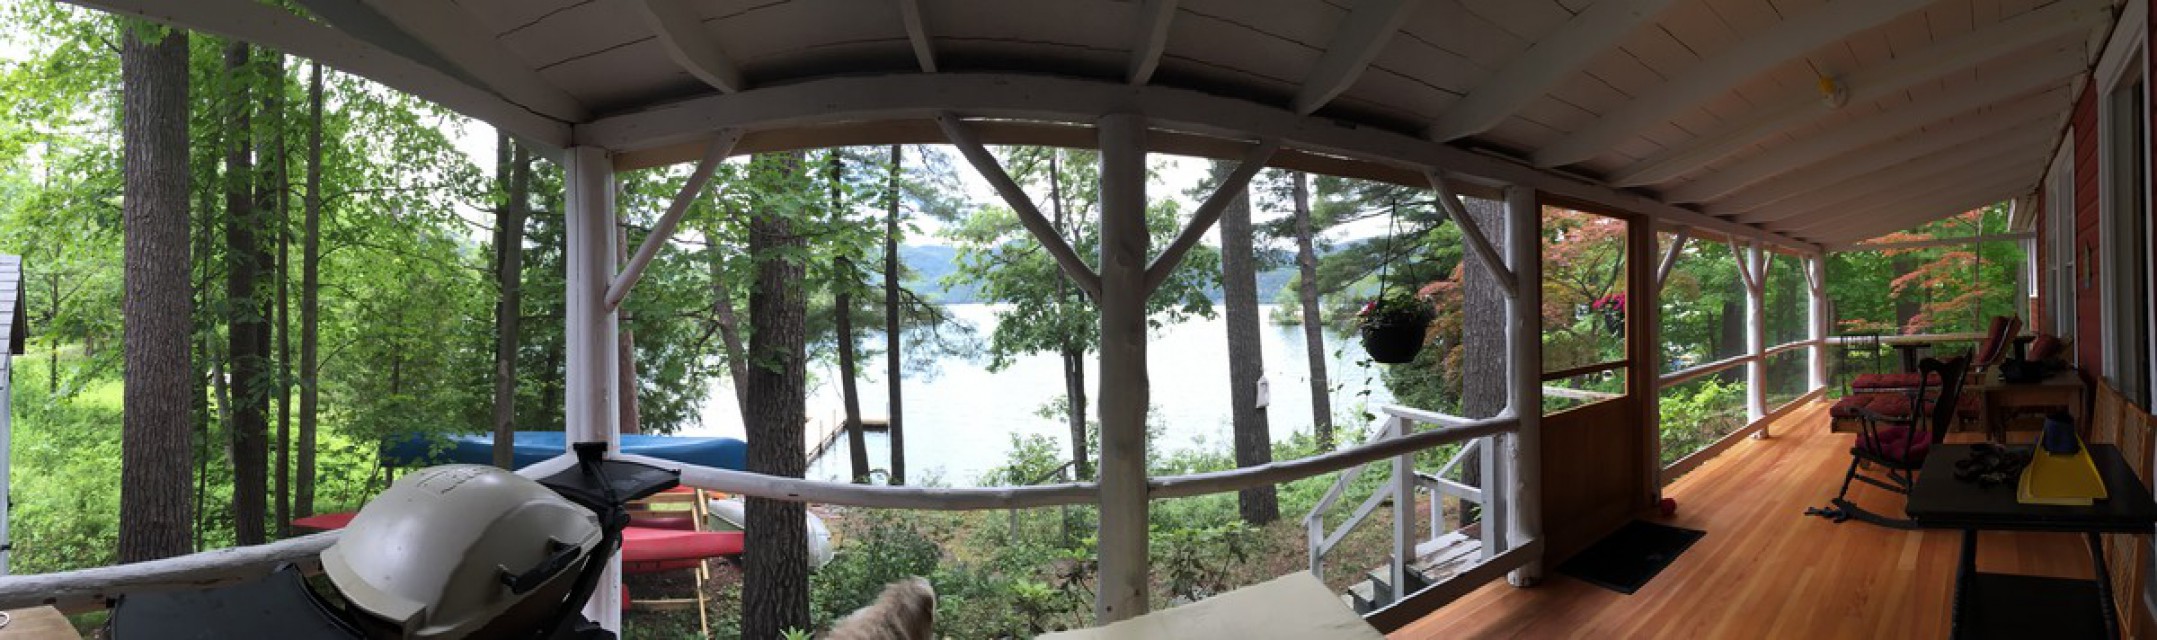 Panorama of porch with views 